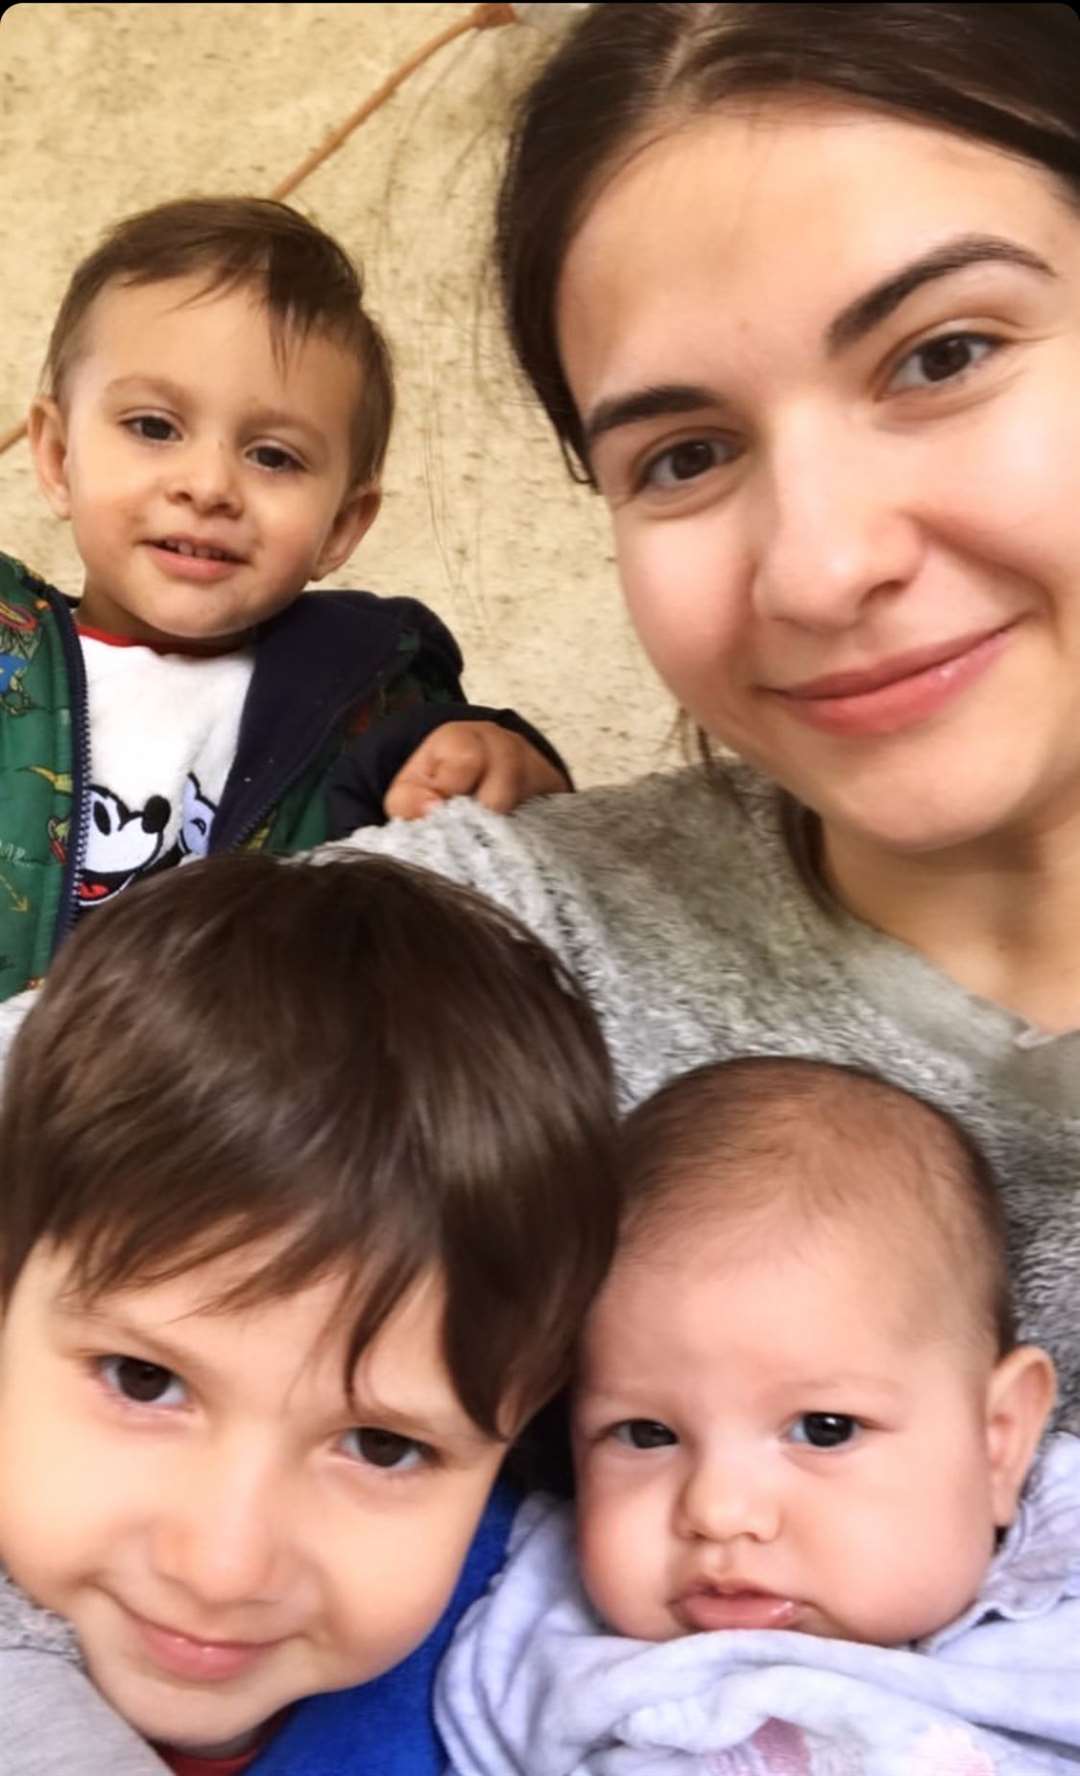 Flora Abdul-Sater (top right) with her children Alexander Abdul-Sater (top left), William Abdul-Sater, (bottom right) and Jazmin Abdul-Sater (Flora Abdul-Sater/PA)